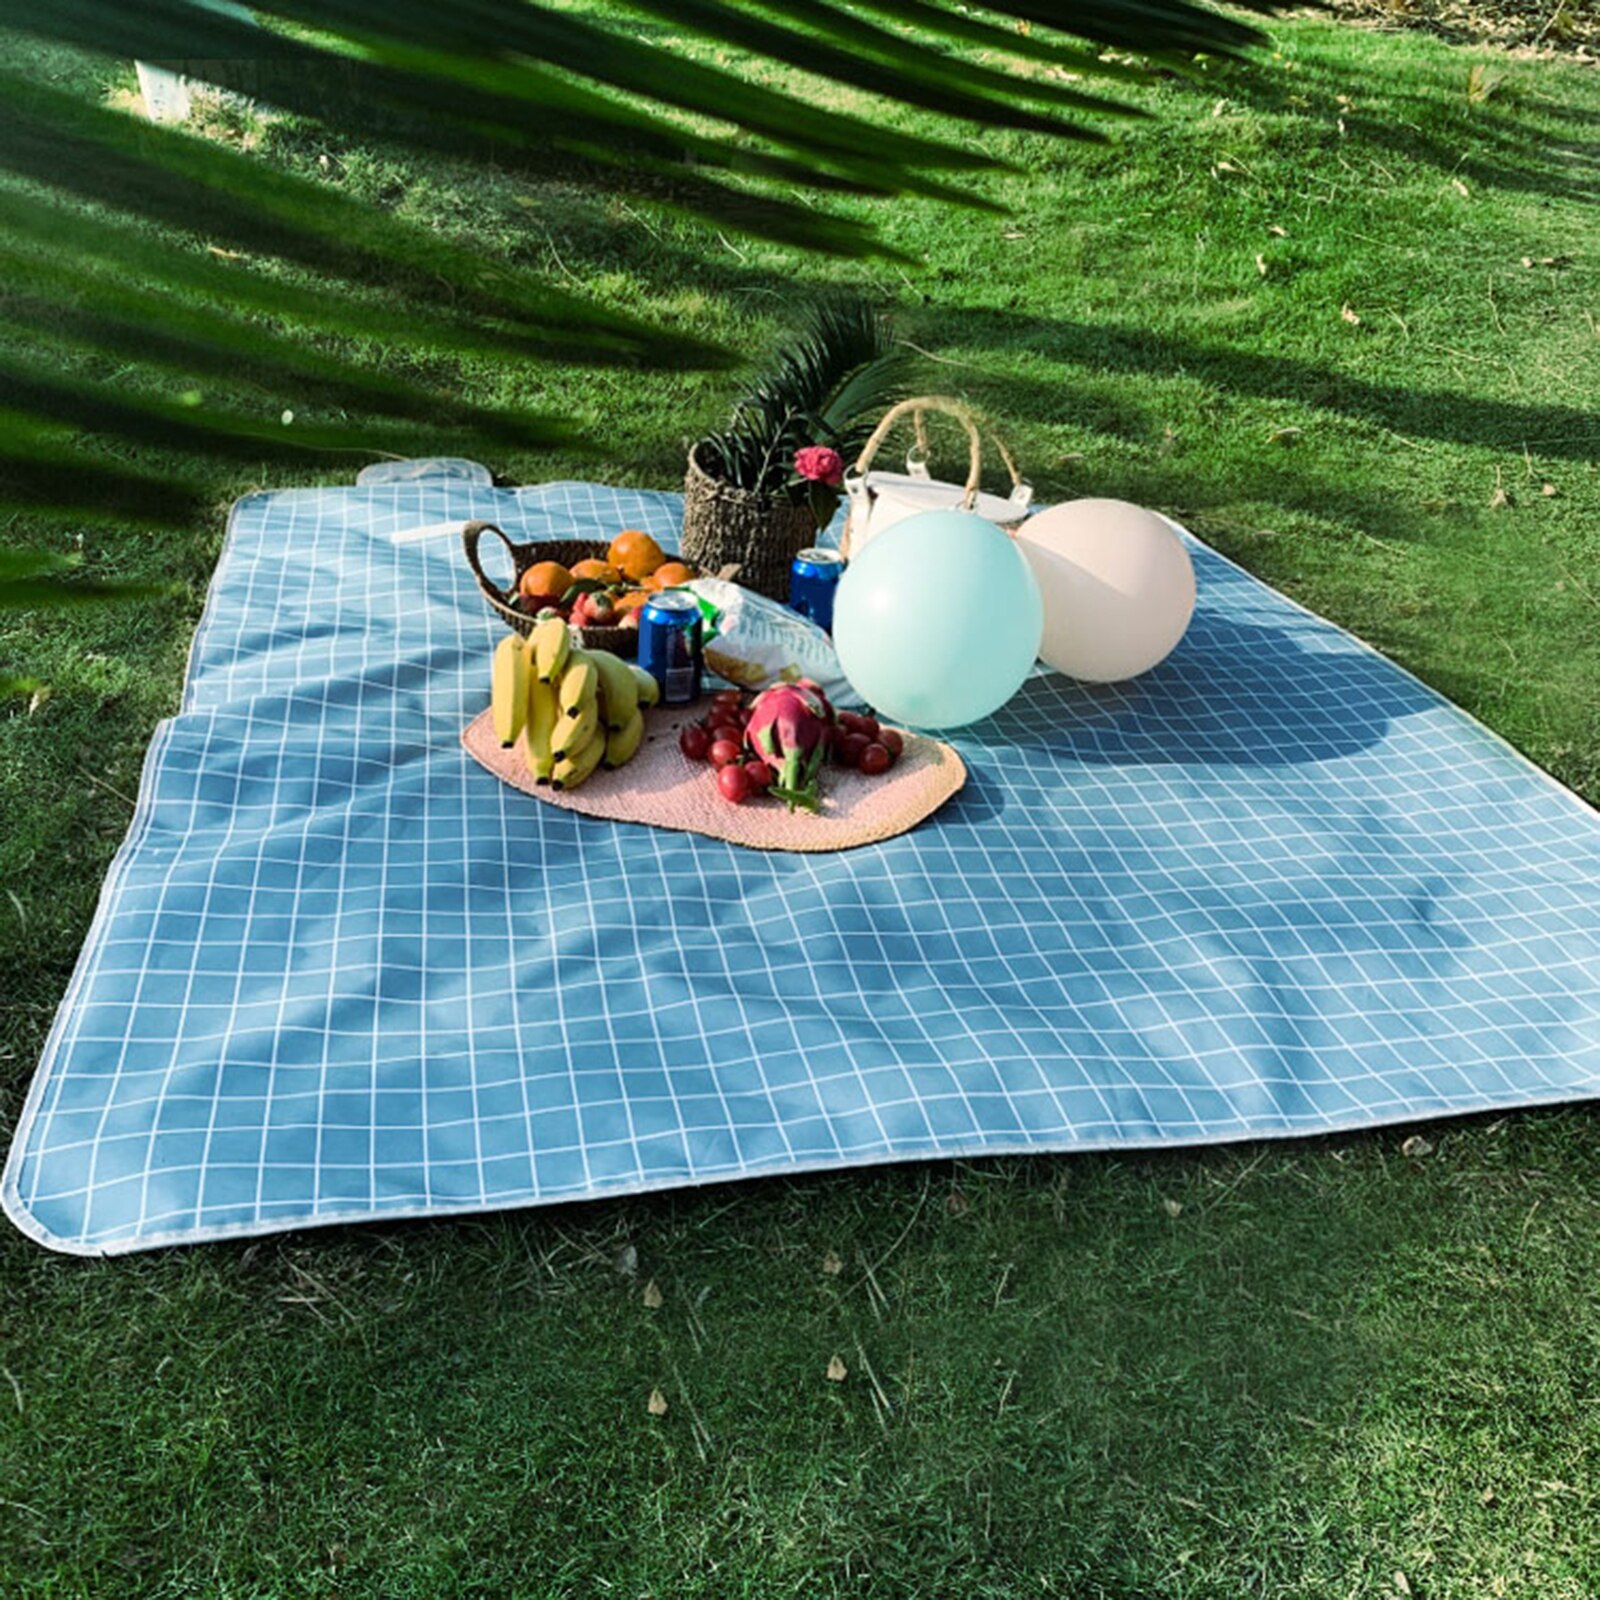 Foldable Picnic Blanket 200x200CM Outdoor Waterproof Picnic Mat Pad Breathable Water Resistant Picnic Blanket Mat